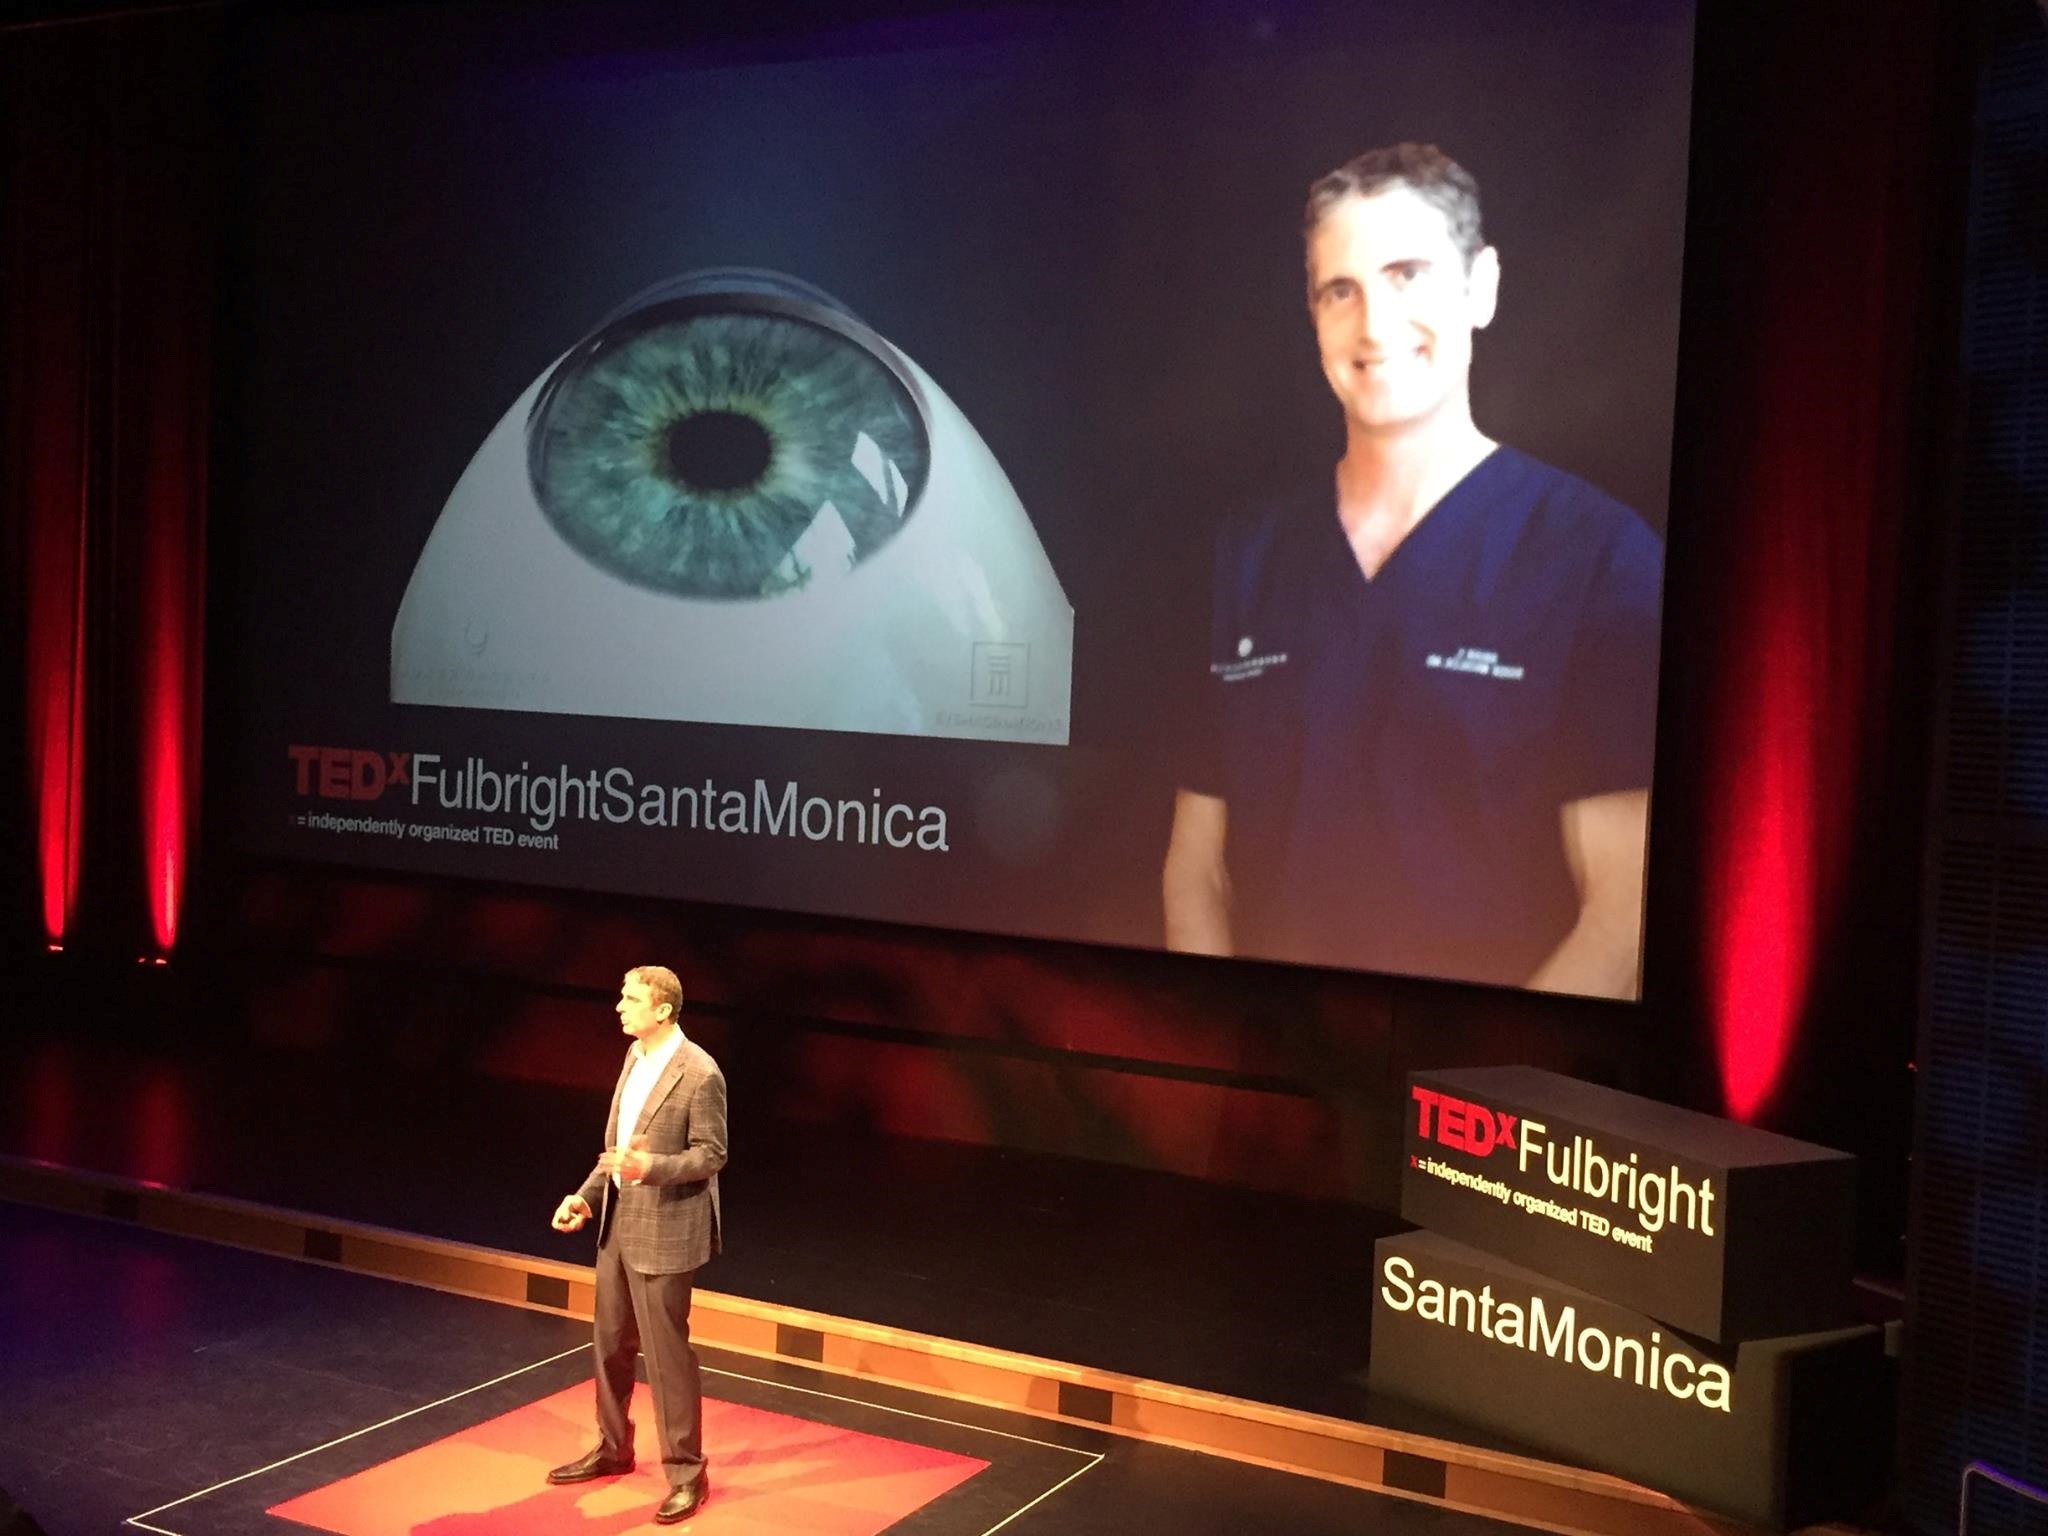 Dr. Brian Boxer Wachler received a standing ovation after his TEDx talk on fighting for patients with Keratoconus using Holcomb C3-R to prevent cornea transplants